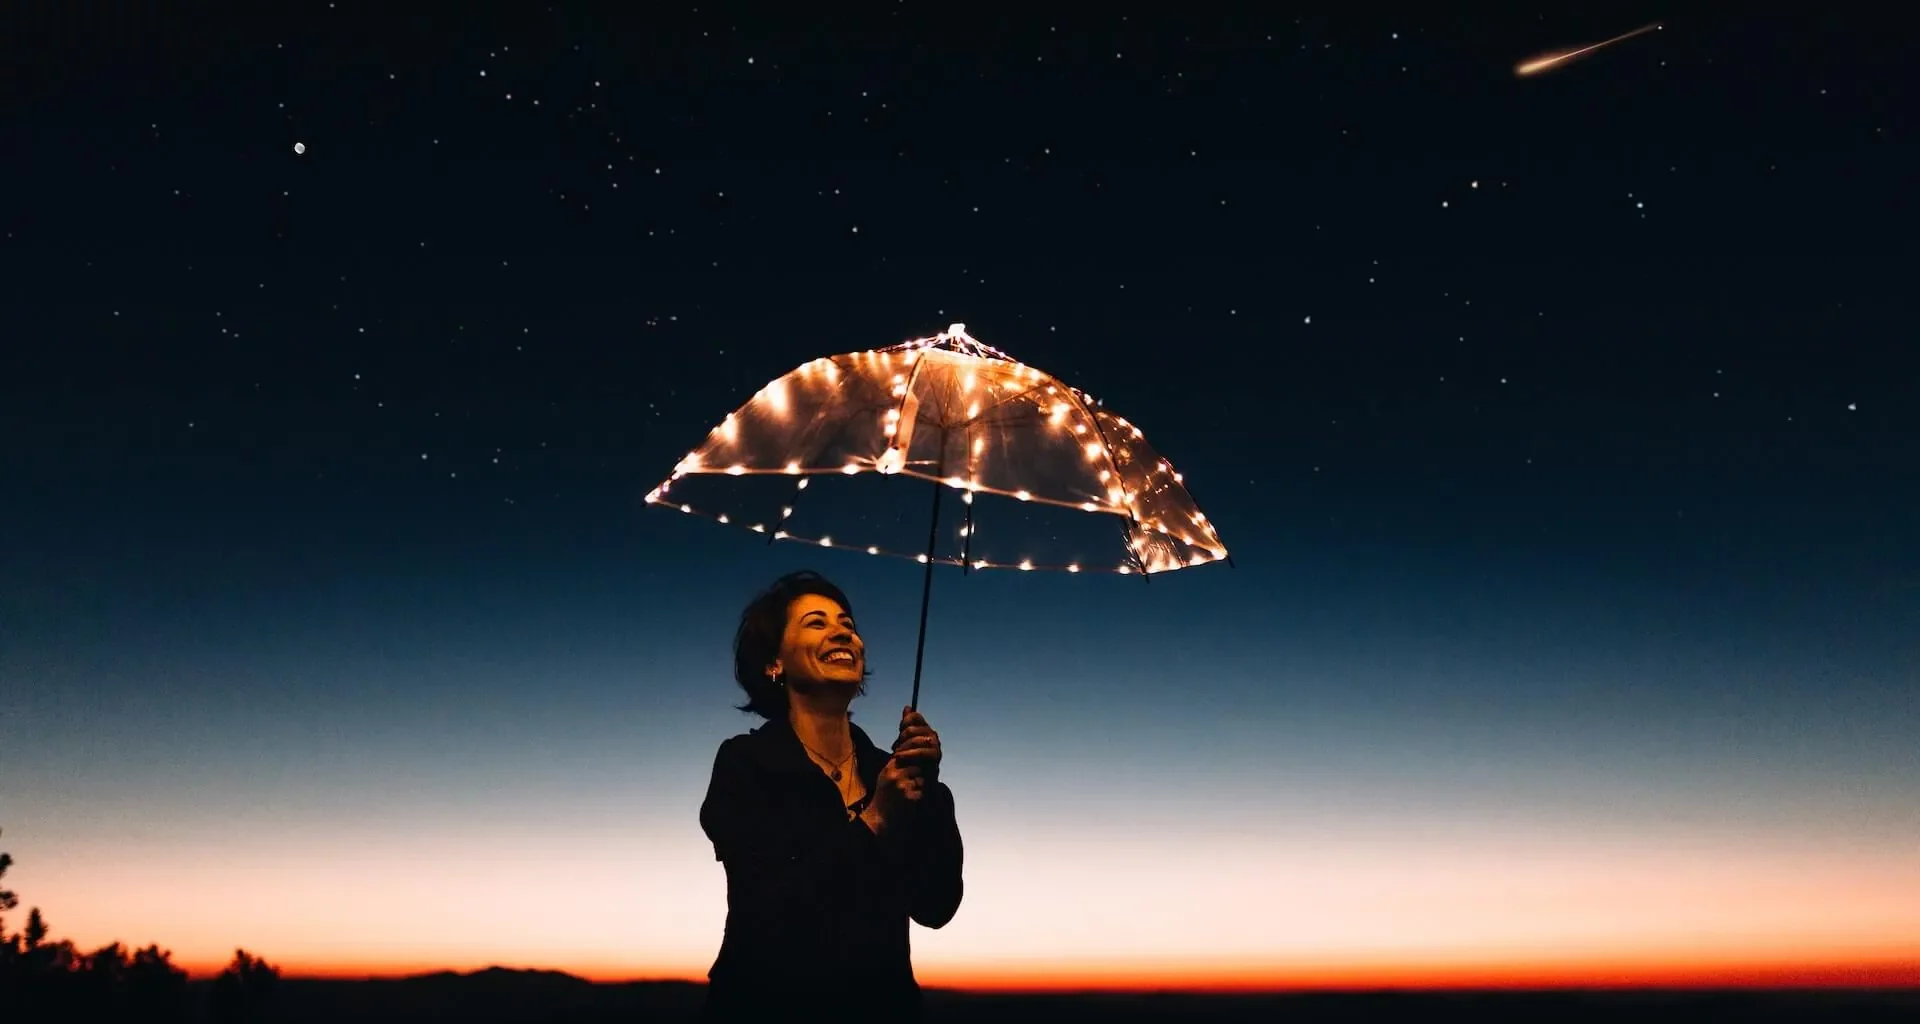 A woman is looking at the umbrella which is illuminated